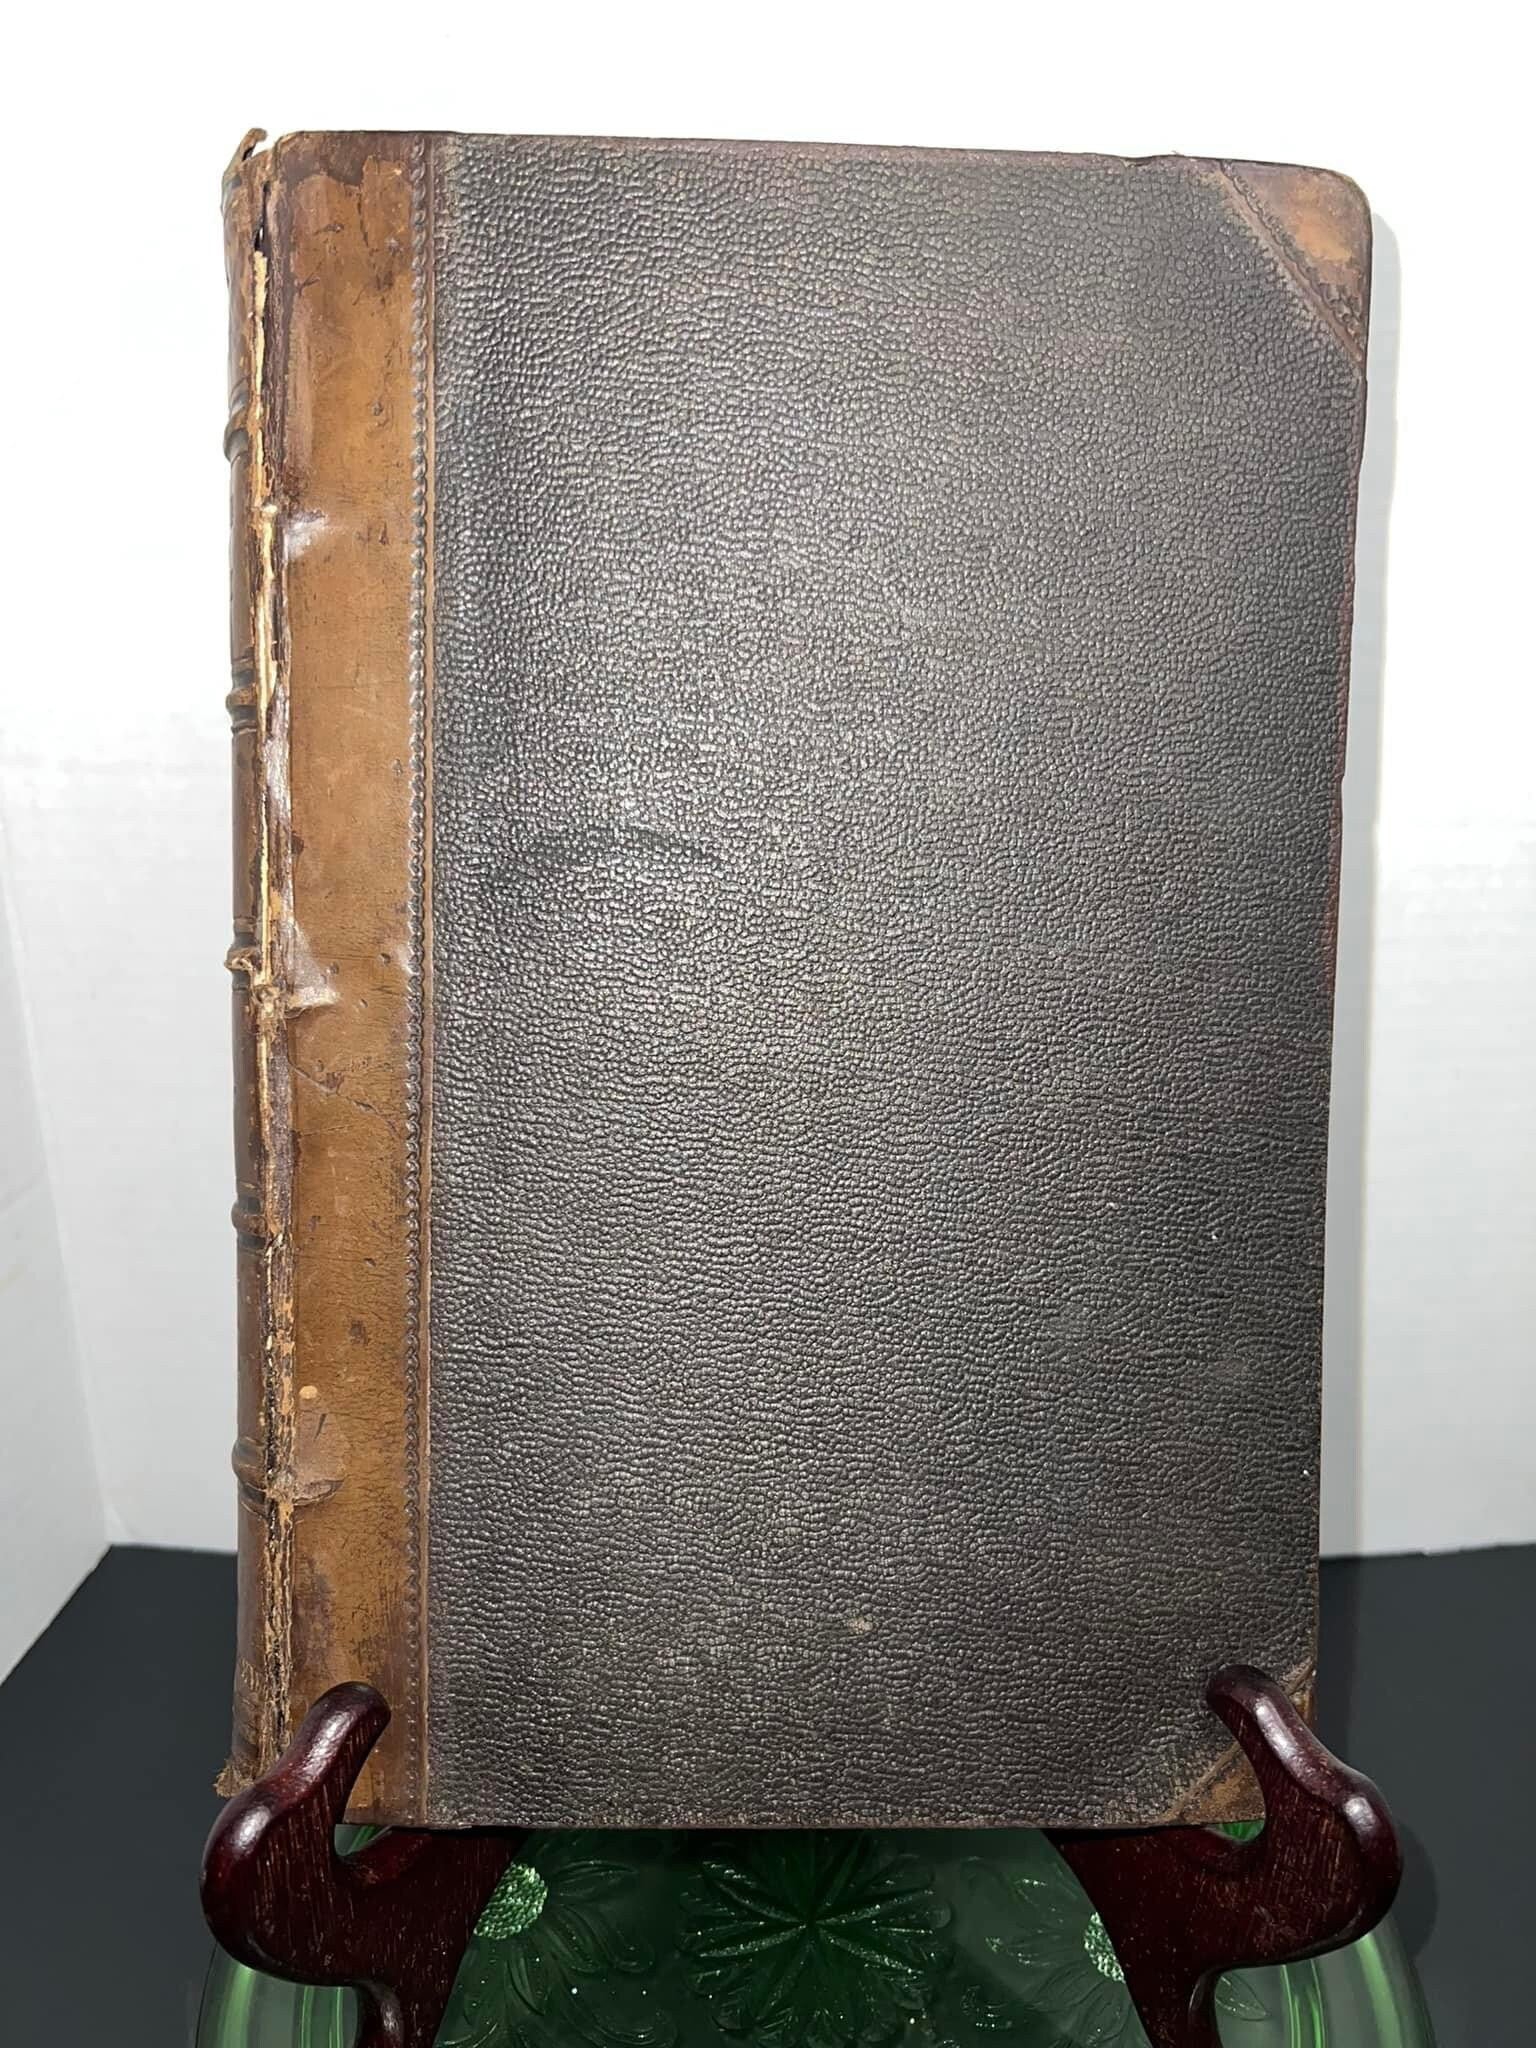 Antique Victorian 1853 The illustrated magazine of art - volume 2 beautiful engravings-2 fold outs